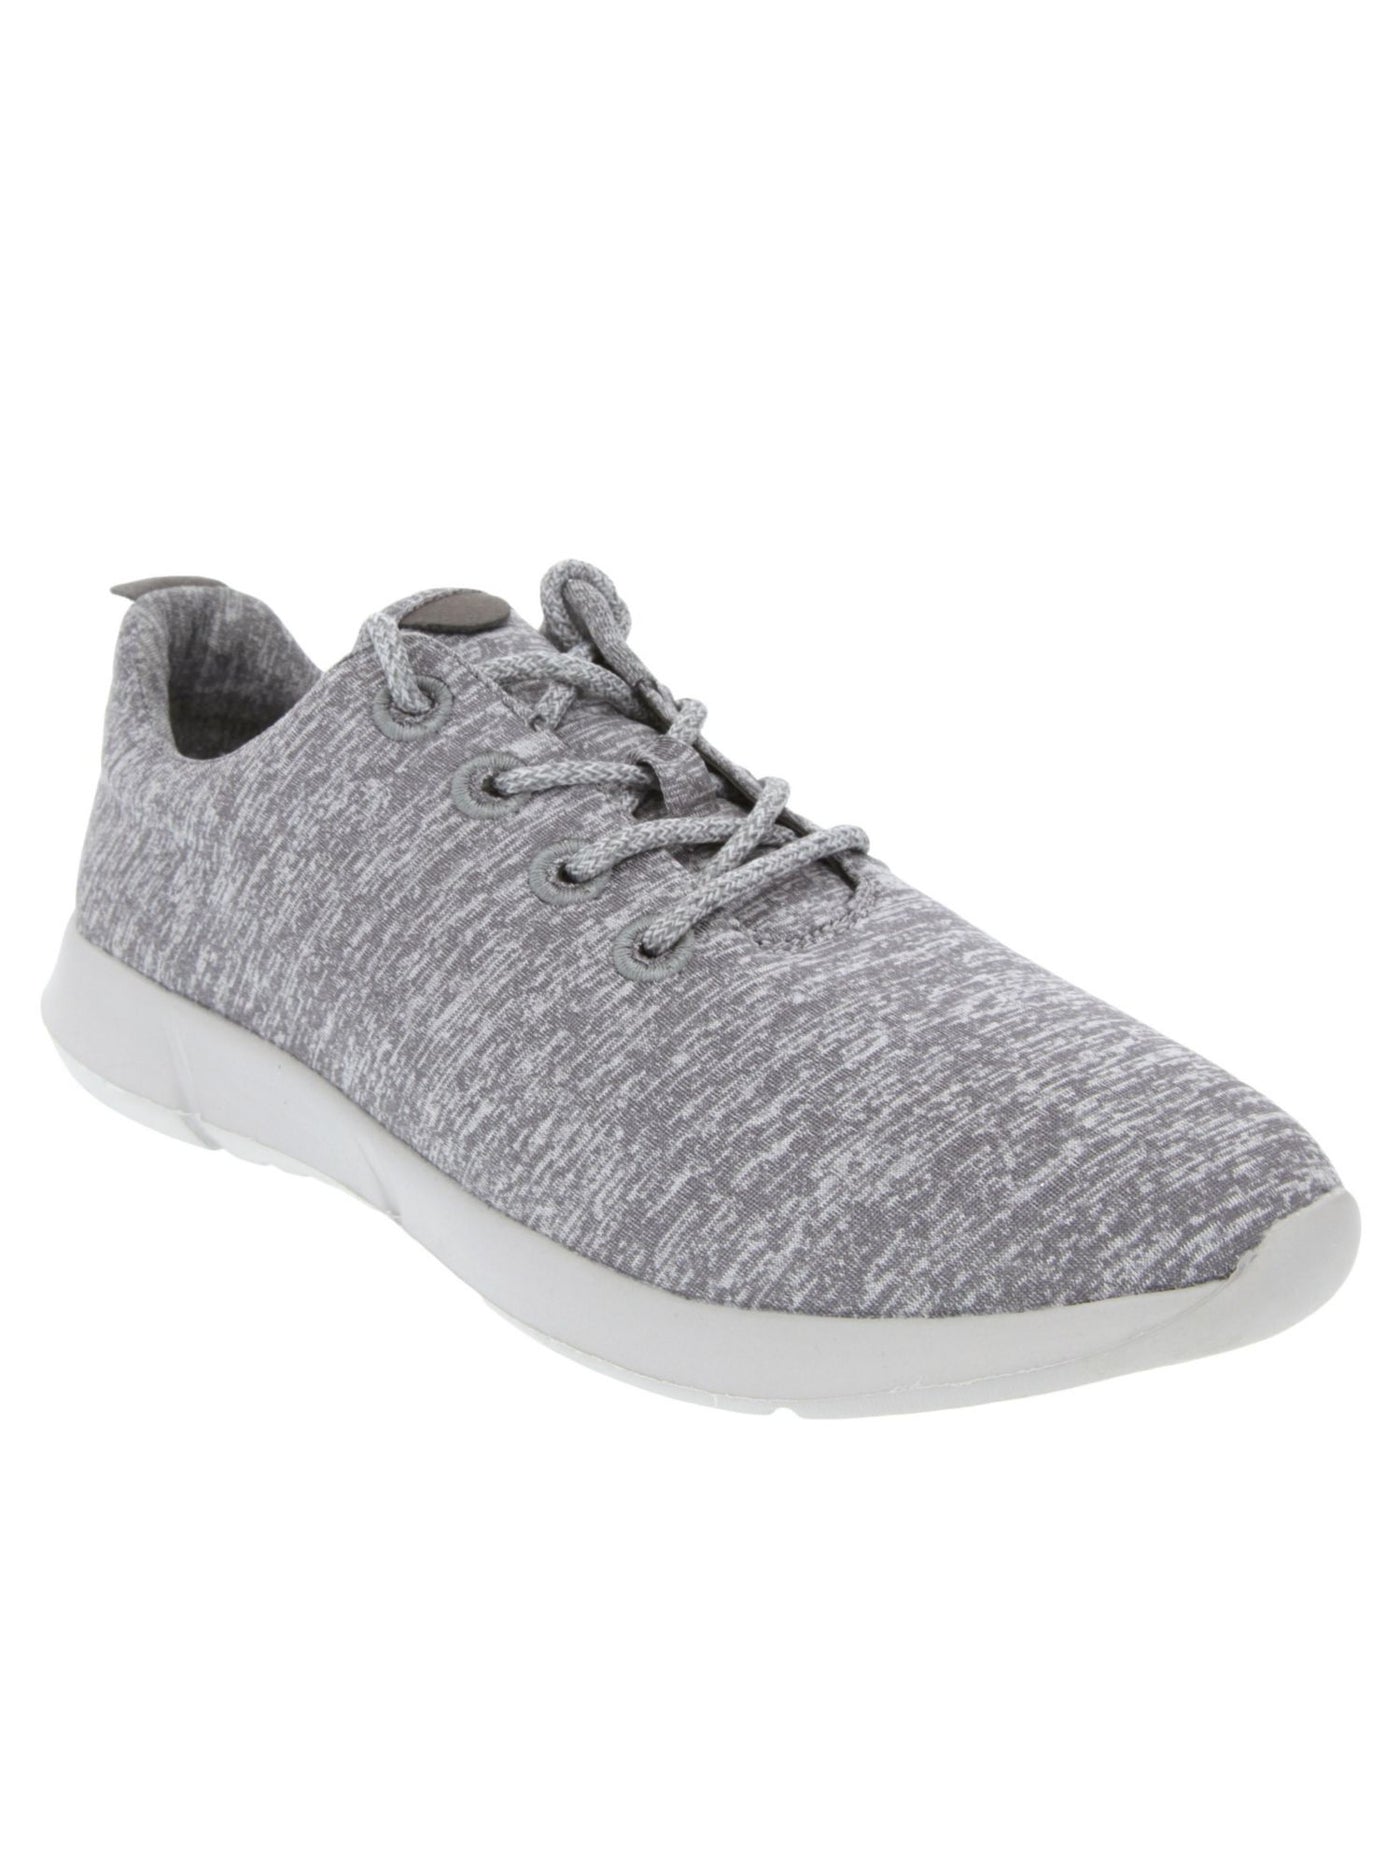 SUGAR Womens Gray Heathered Comfort Round Toe Lace-Up Athletic Sneakers Shoes 9